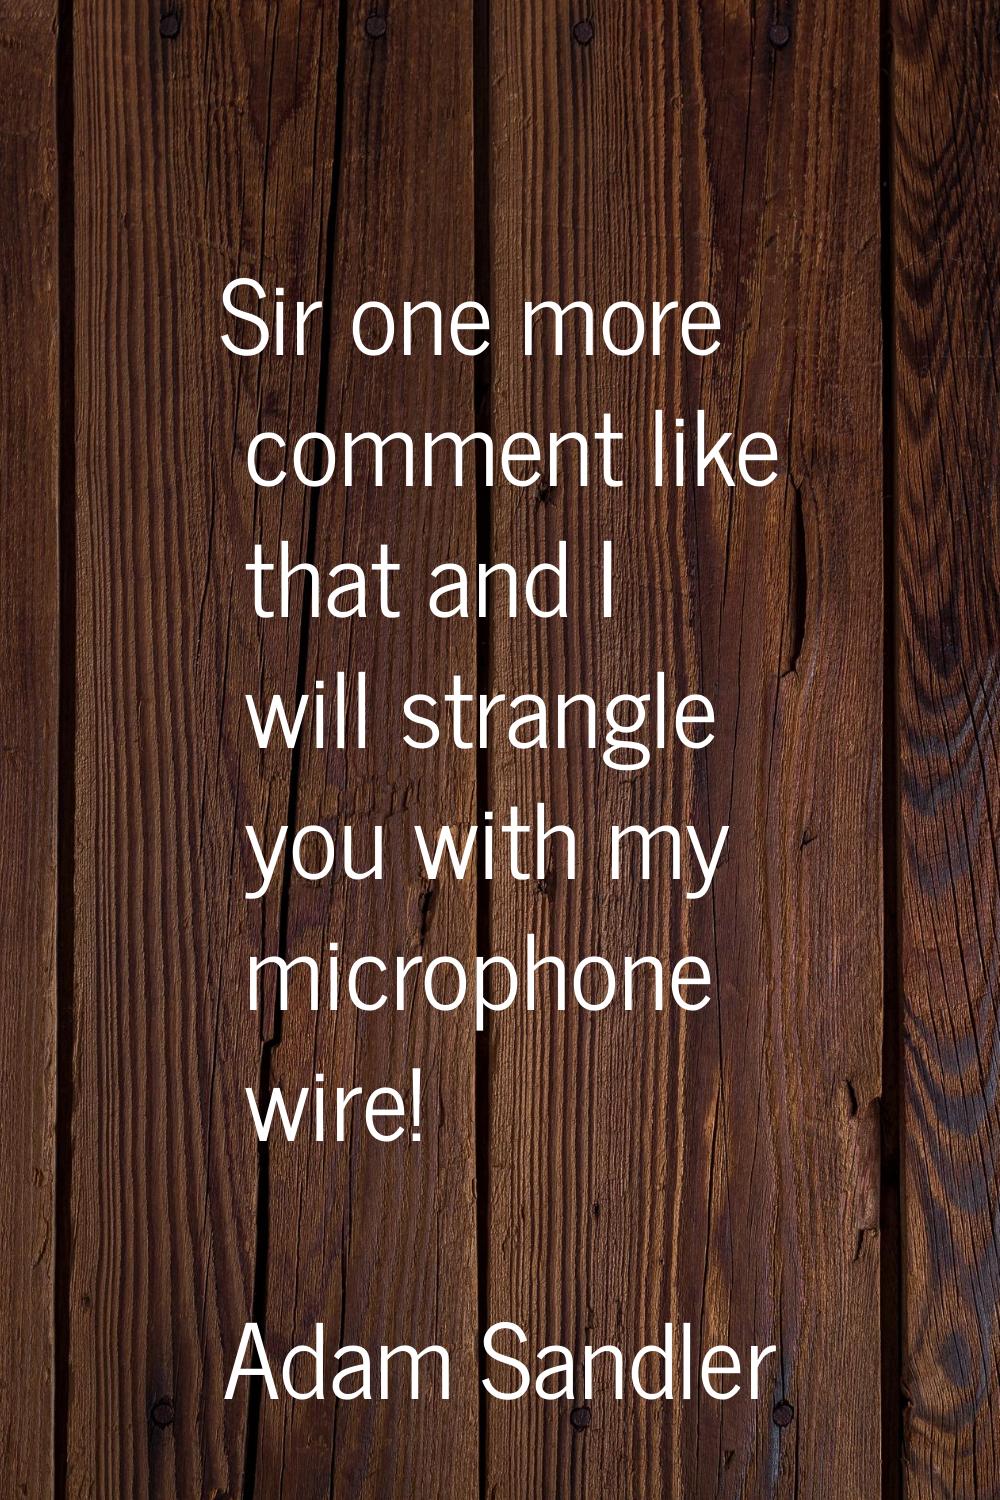 Sir one more comment like that and I will strangle you with my microphone wire!